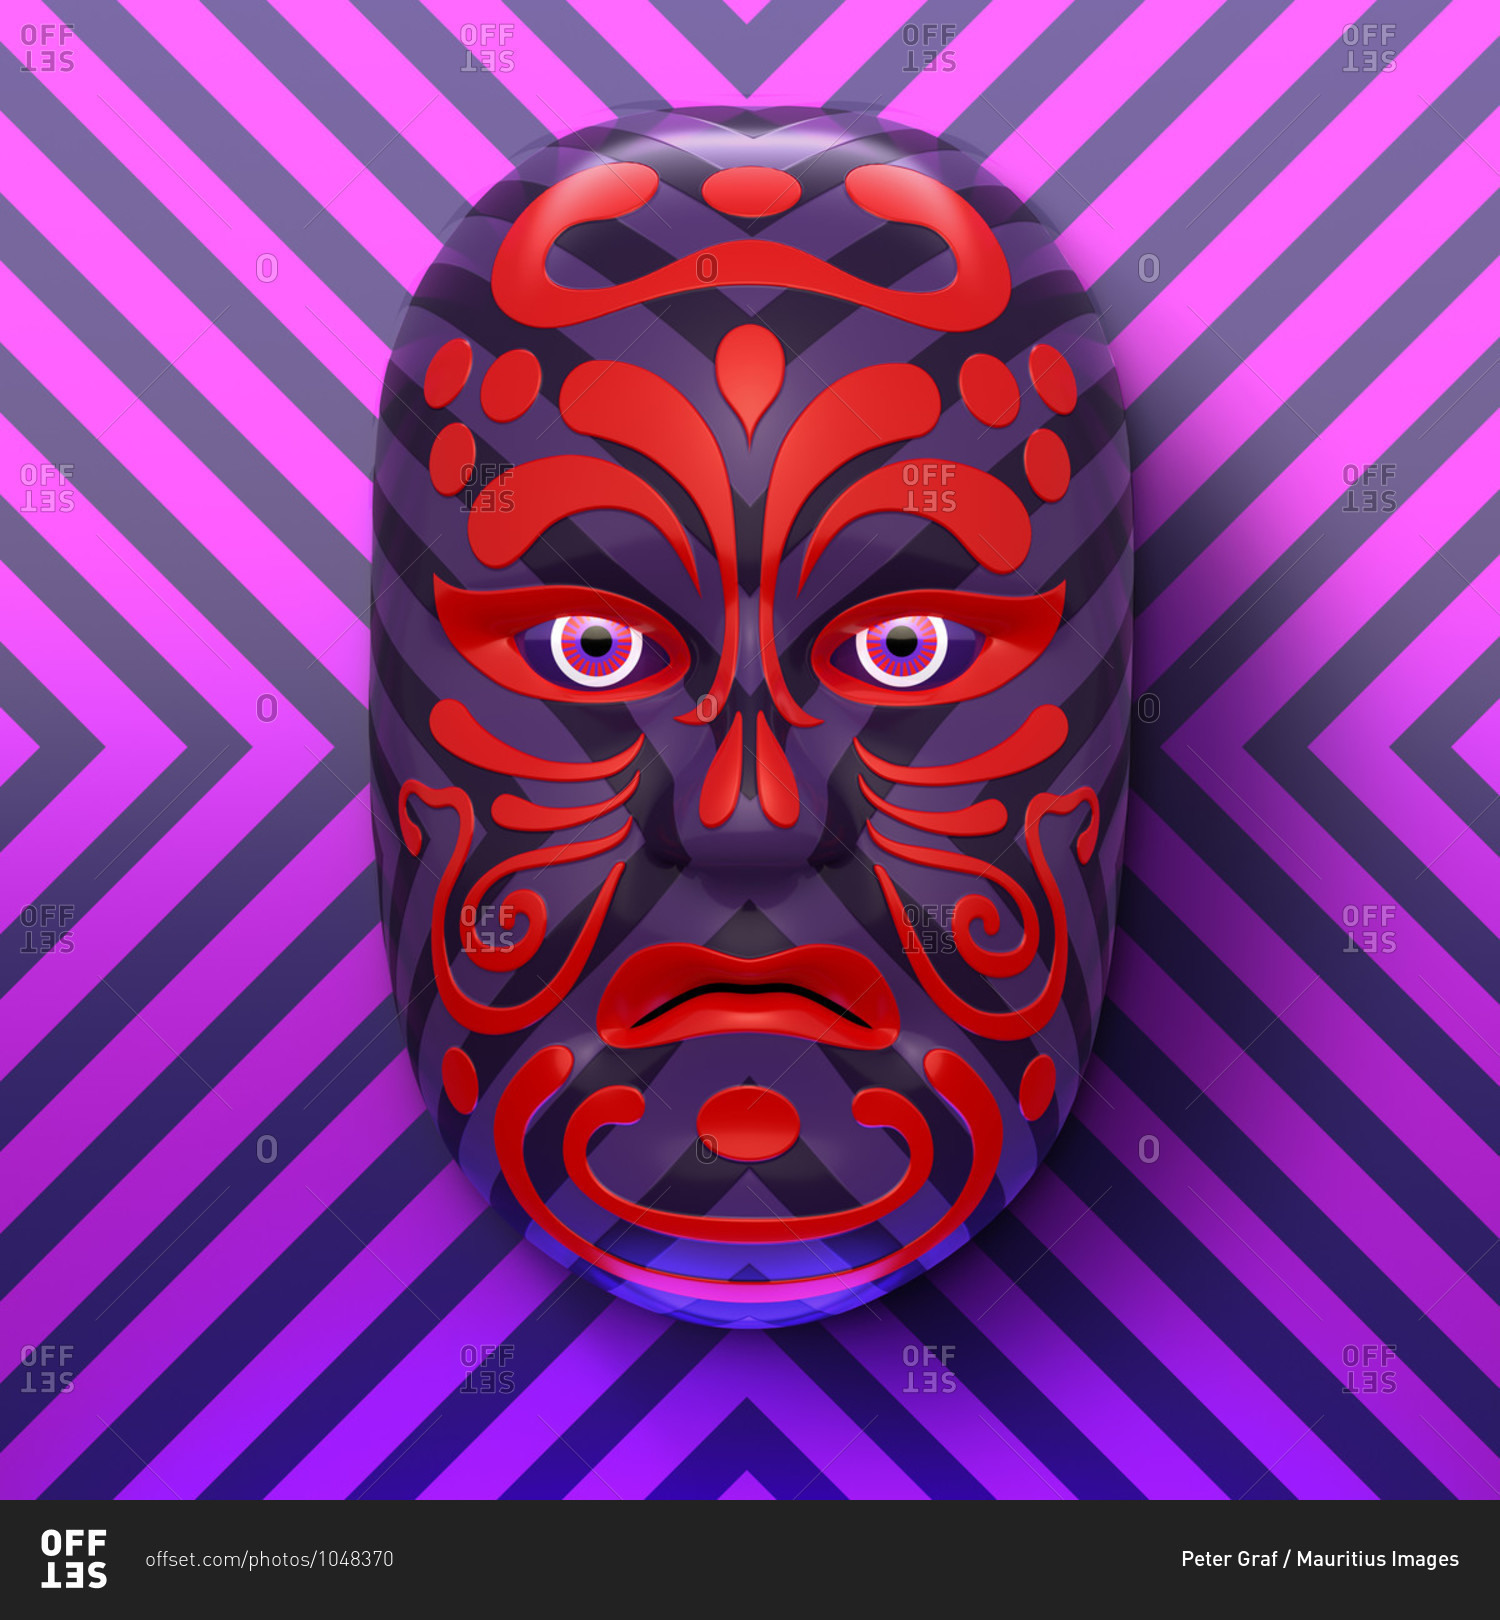 Asian theater mask with red ornaments against purple-pink striped background